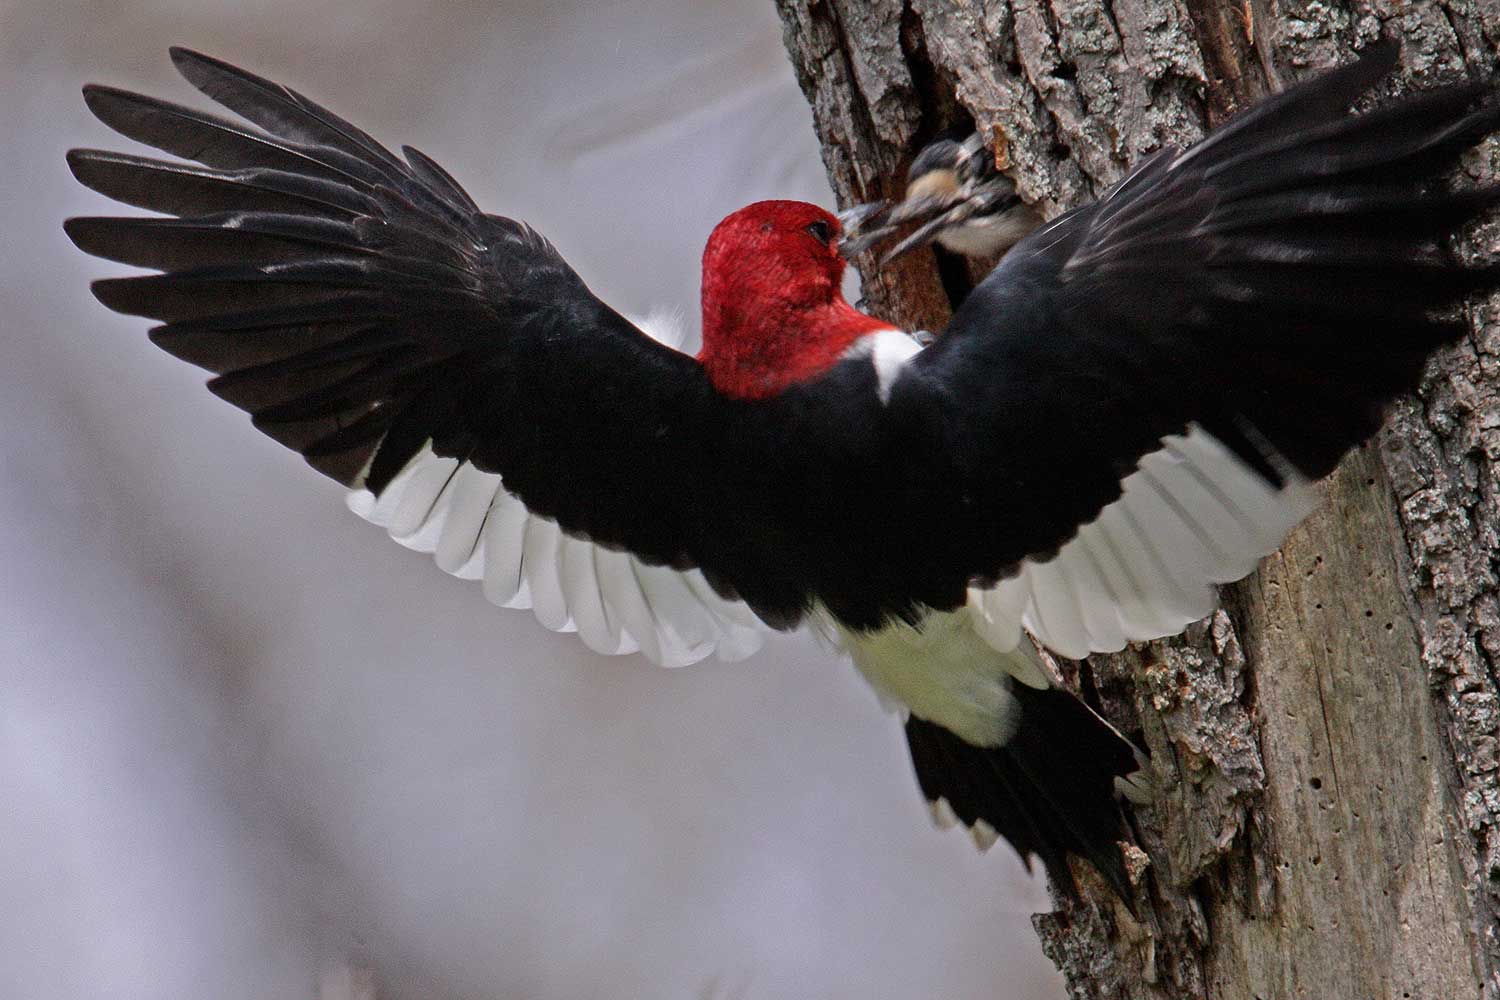 A red-headed woodpecker with its wings outstretched as tries to get into a tree cavity occupied by another bird.